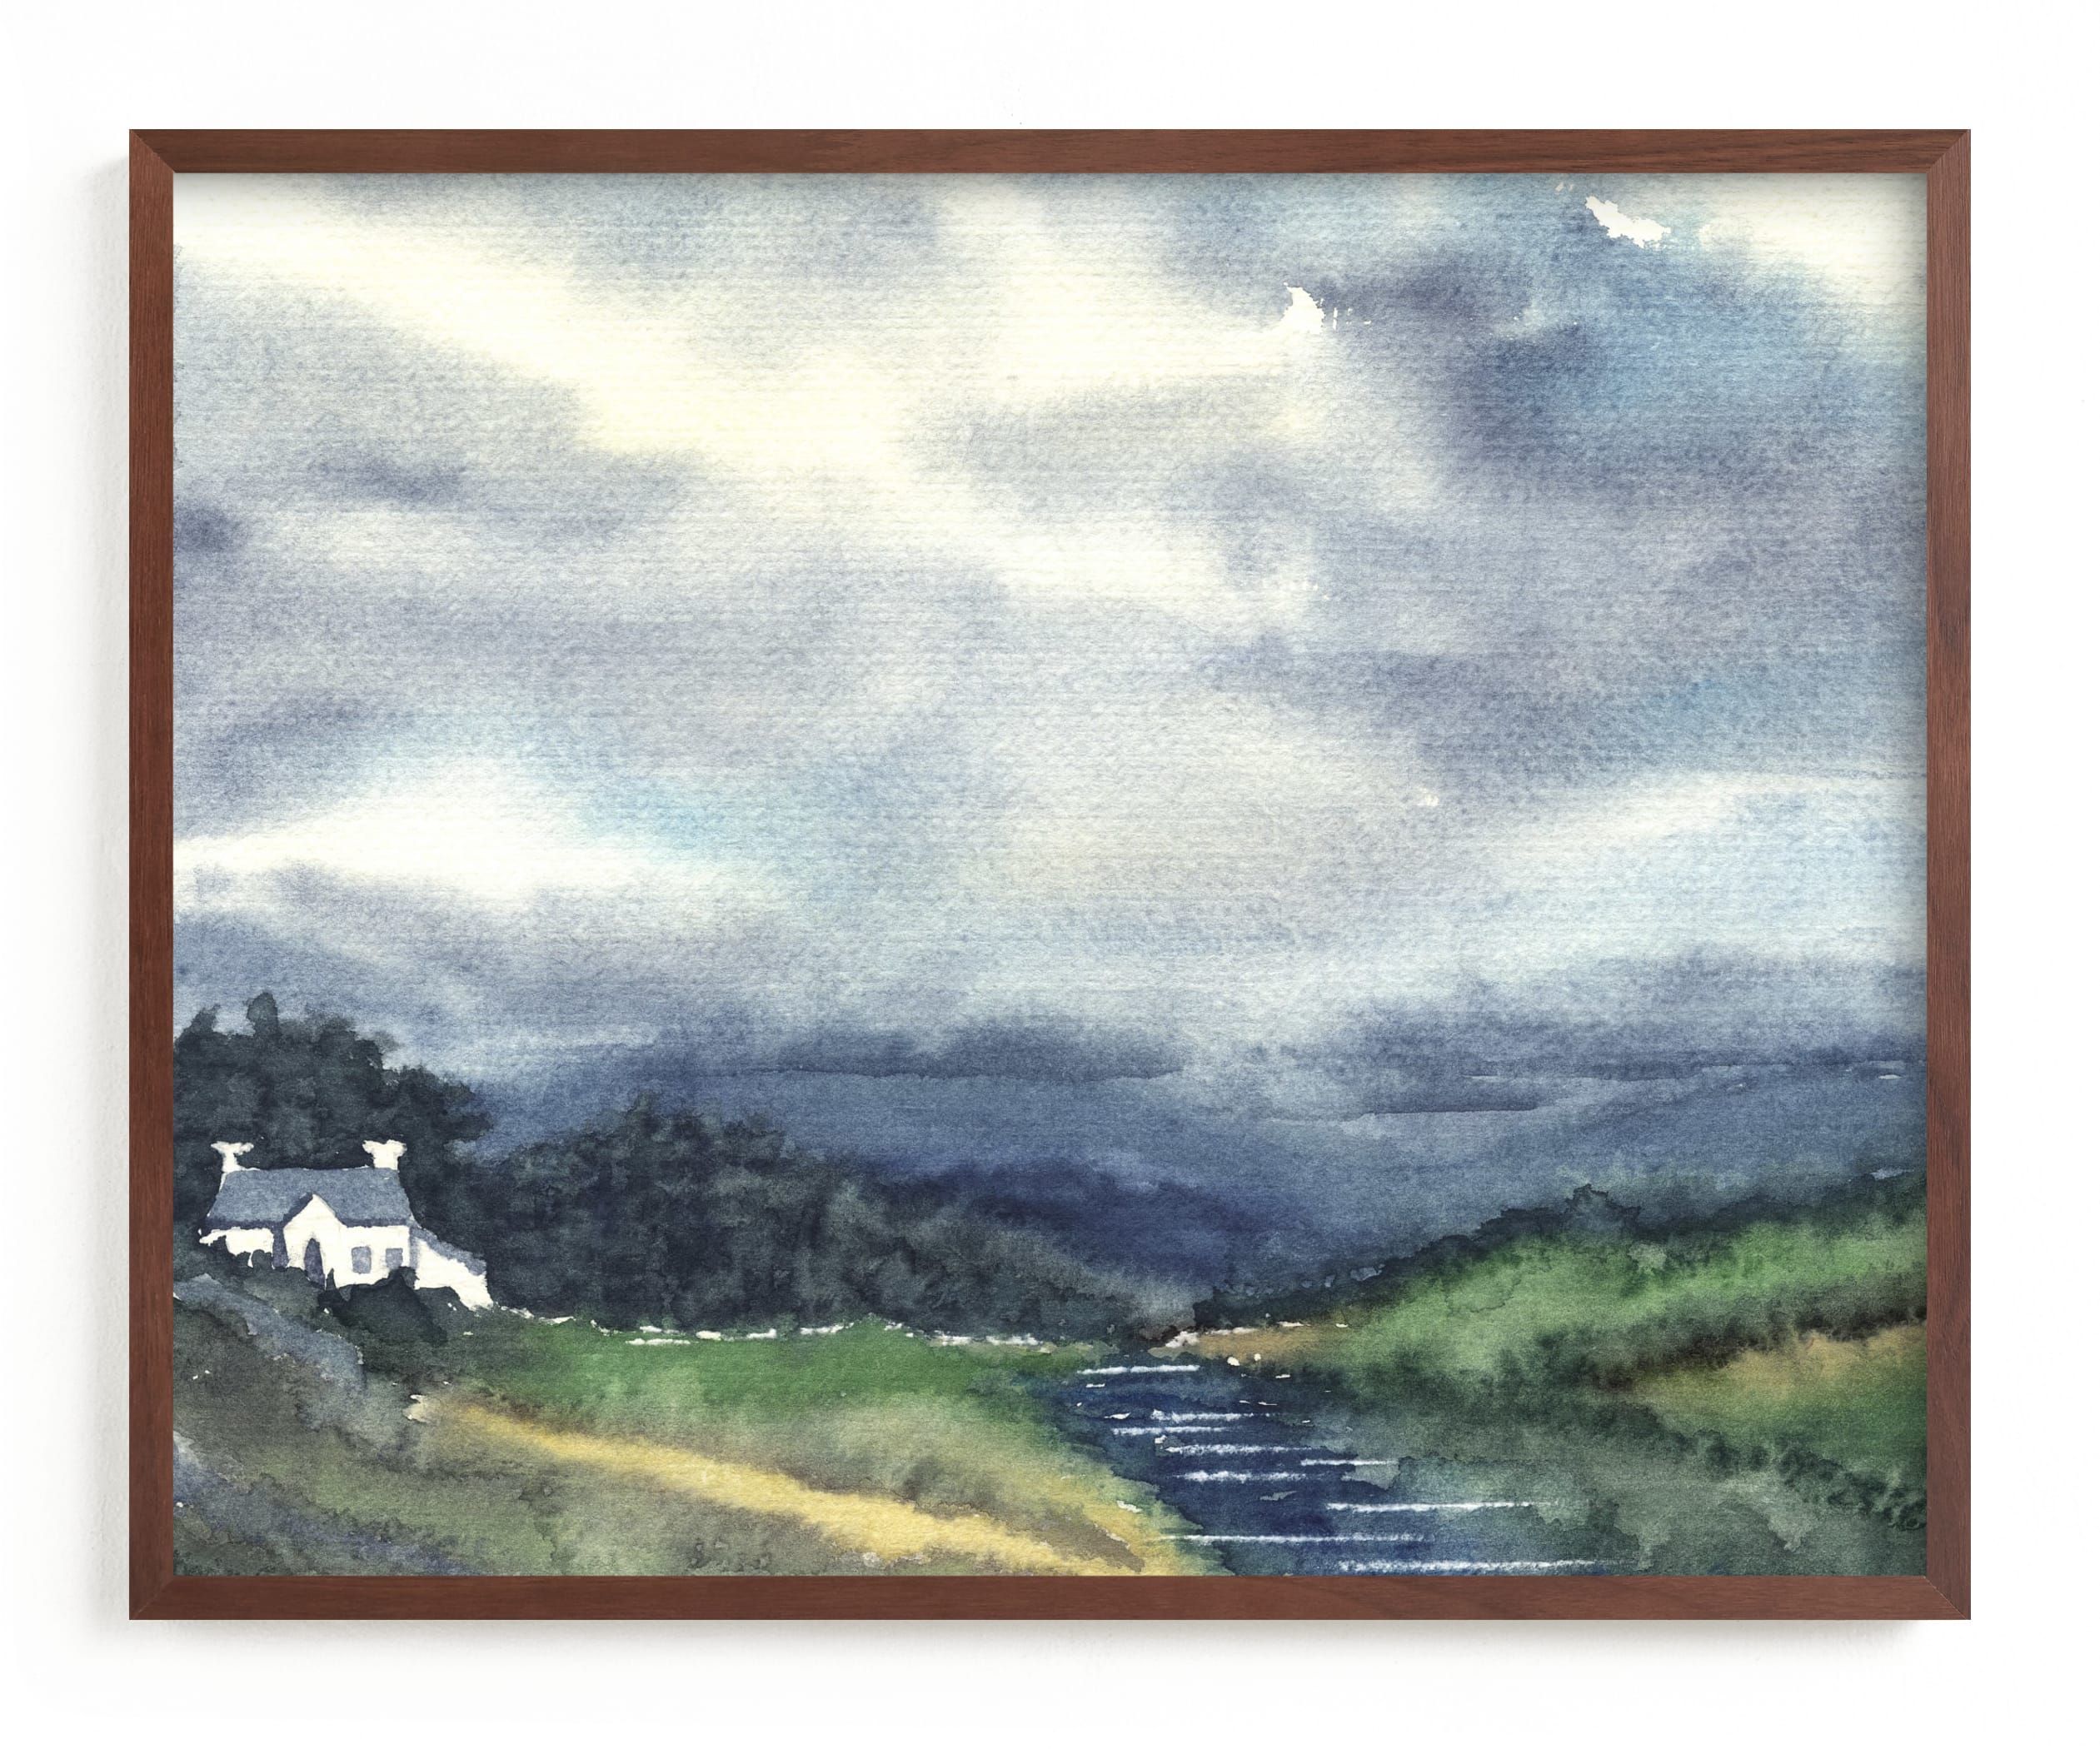 "Cloud Symphony Donegal Ireland" - Painting Limited Edition Art Print by Eva Marion. | Minted